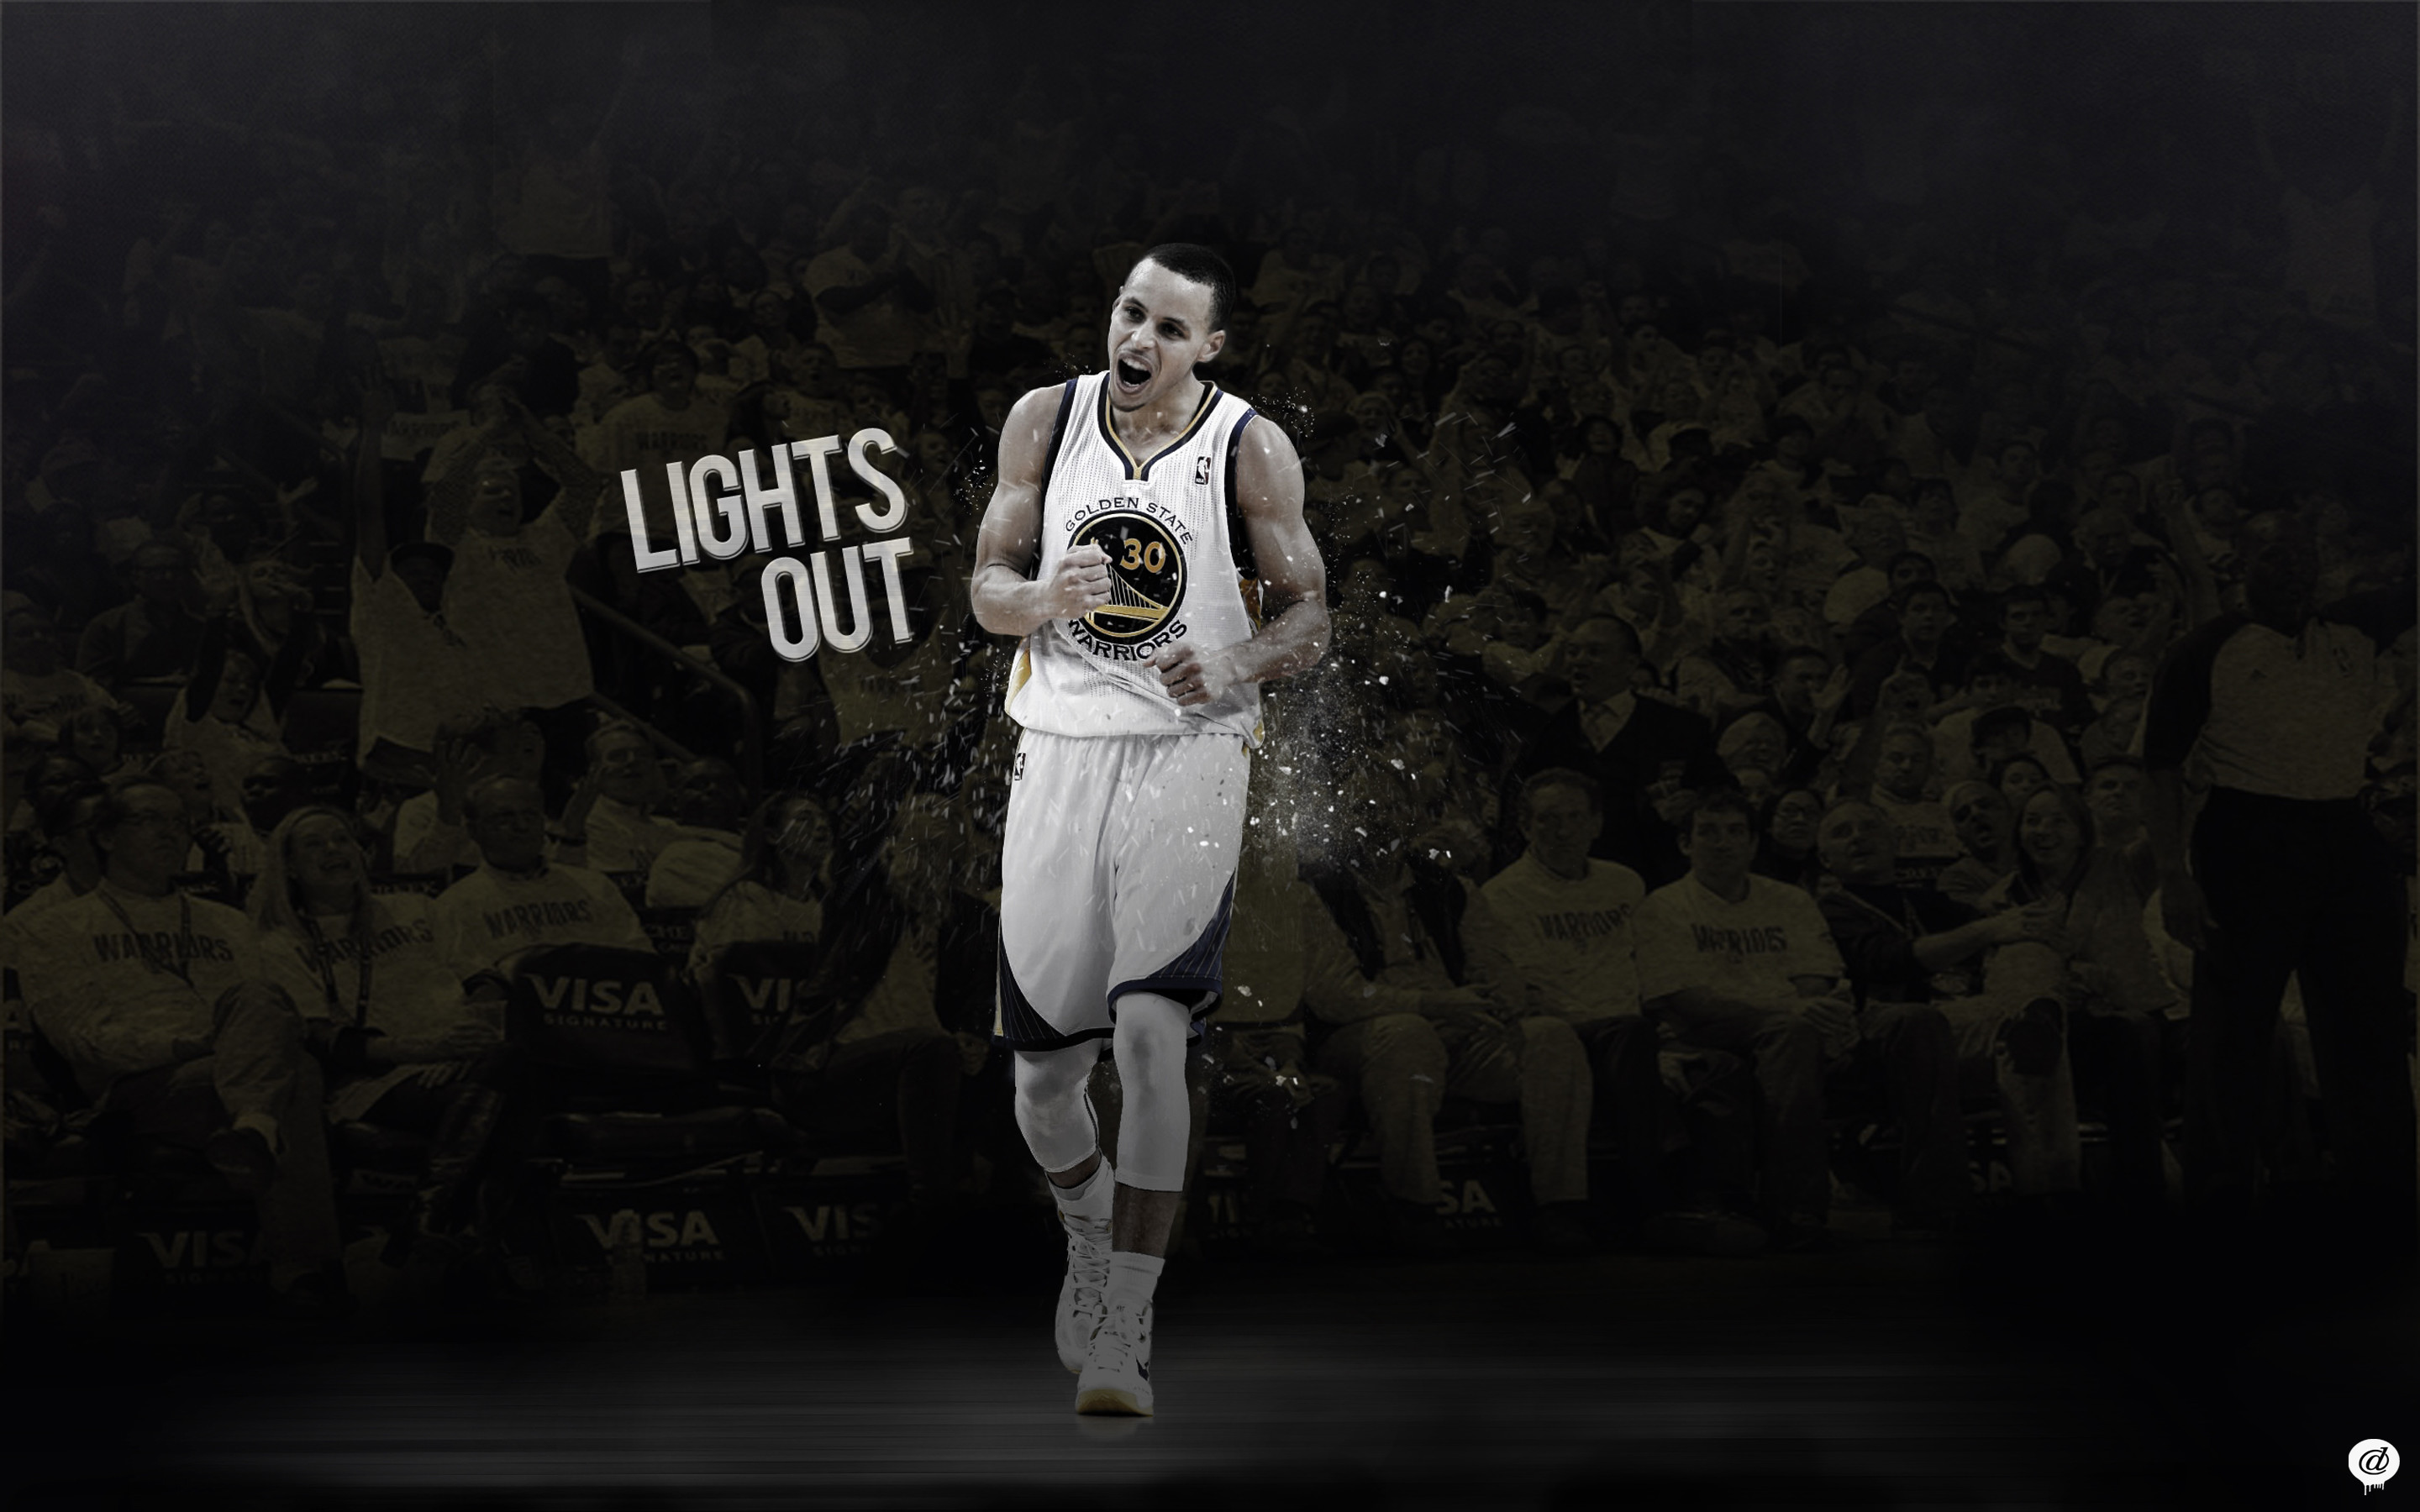 Stephen Curry Lights Out Wallpaper by 31ANDONLY.